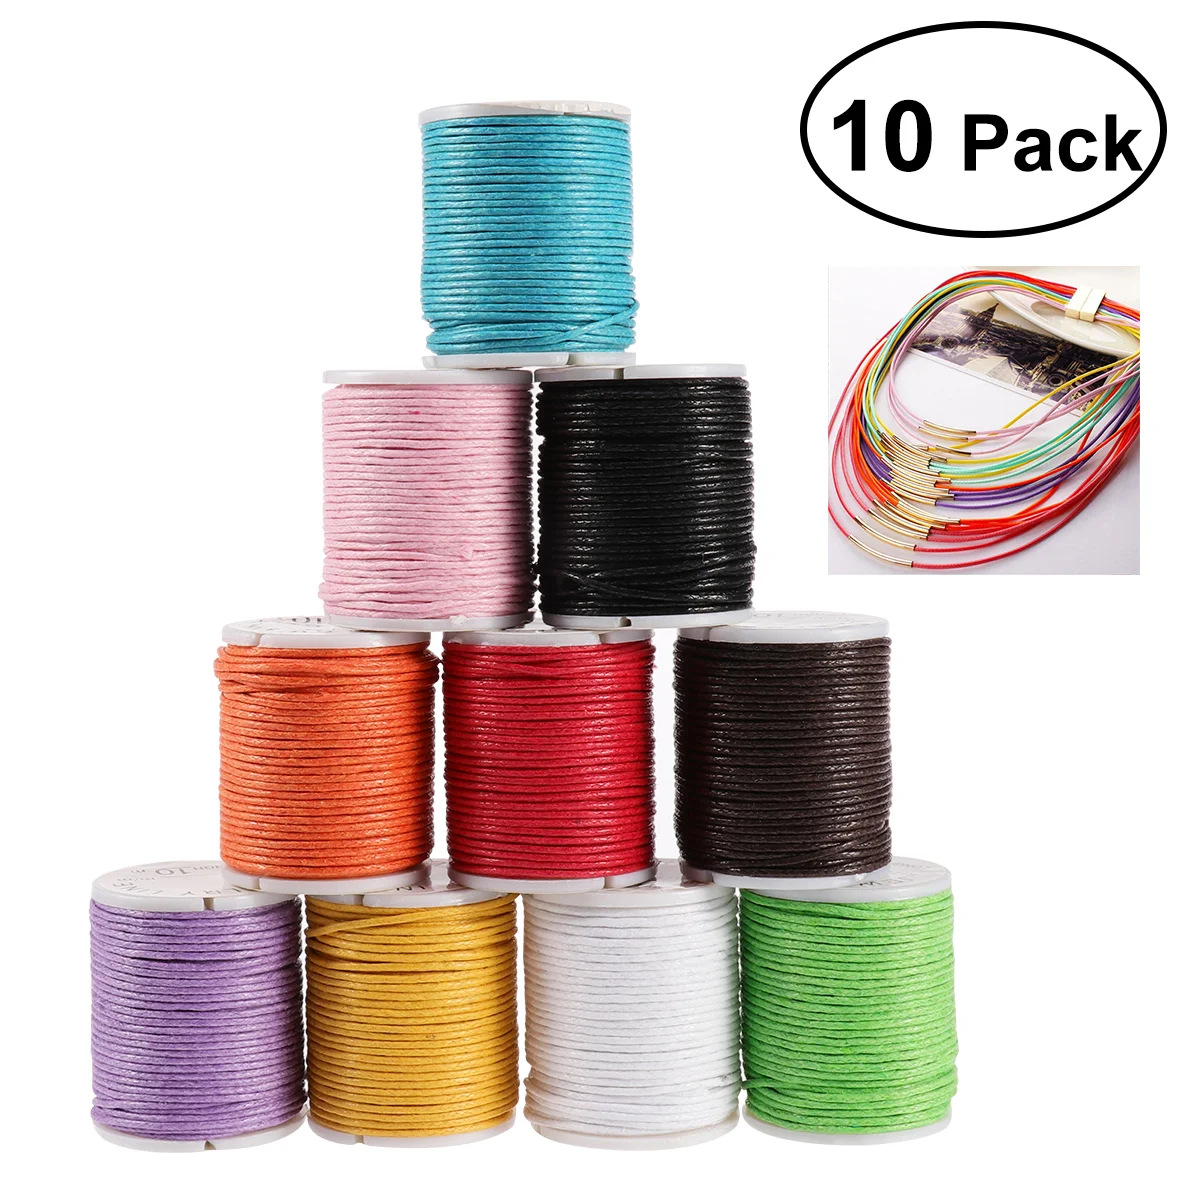 

ROSENICE 10pcs 10M 1MM Waxed Cotton Cords Strings Ropes for DIY Necklace Bracelet Craft Making (Random Color)